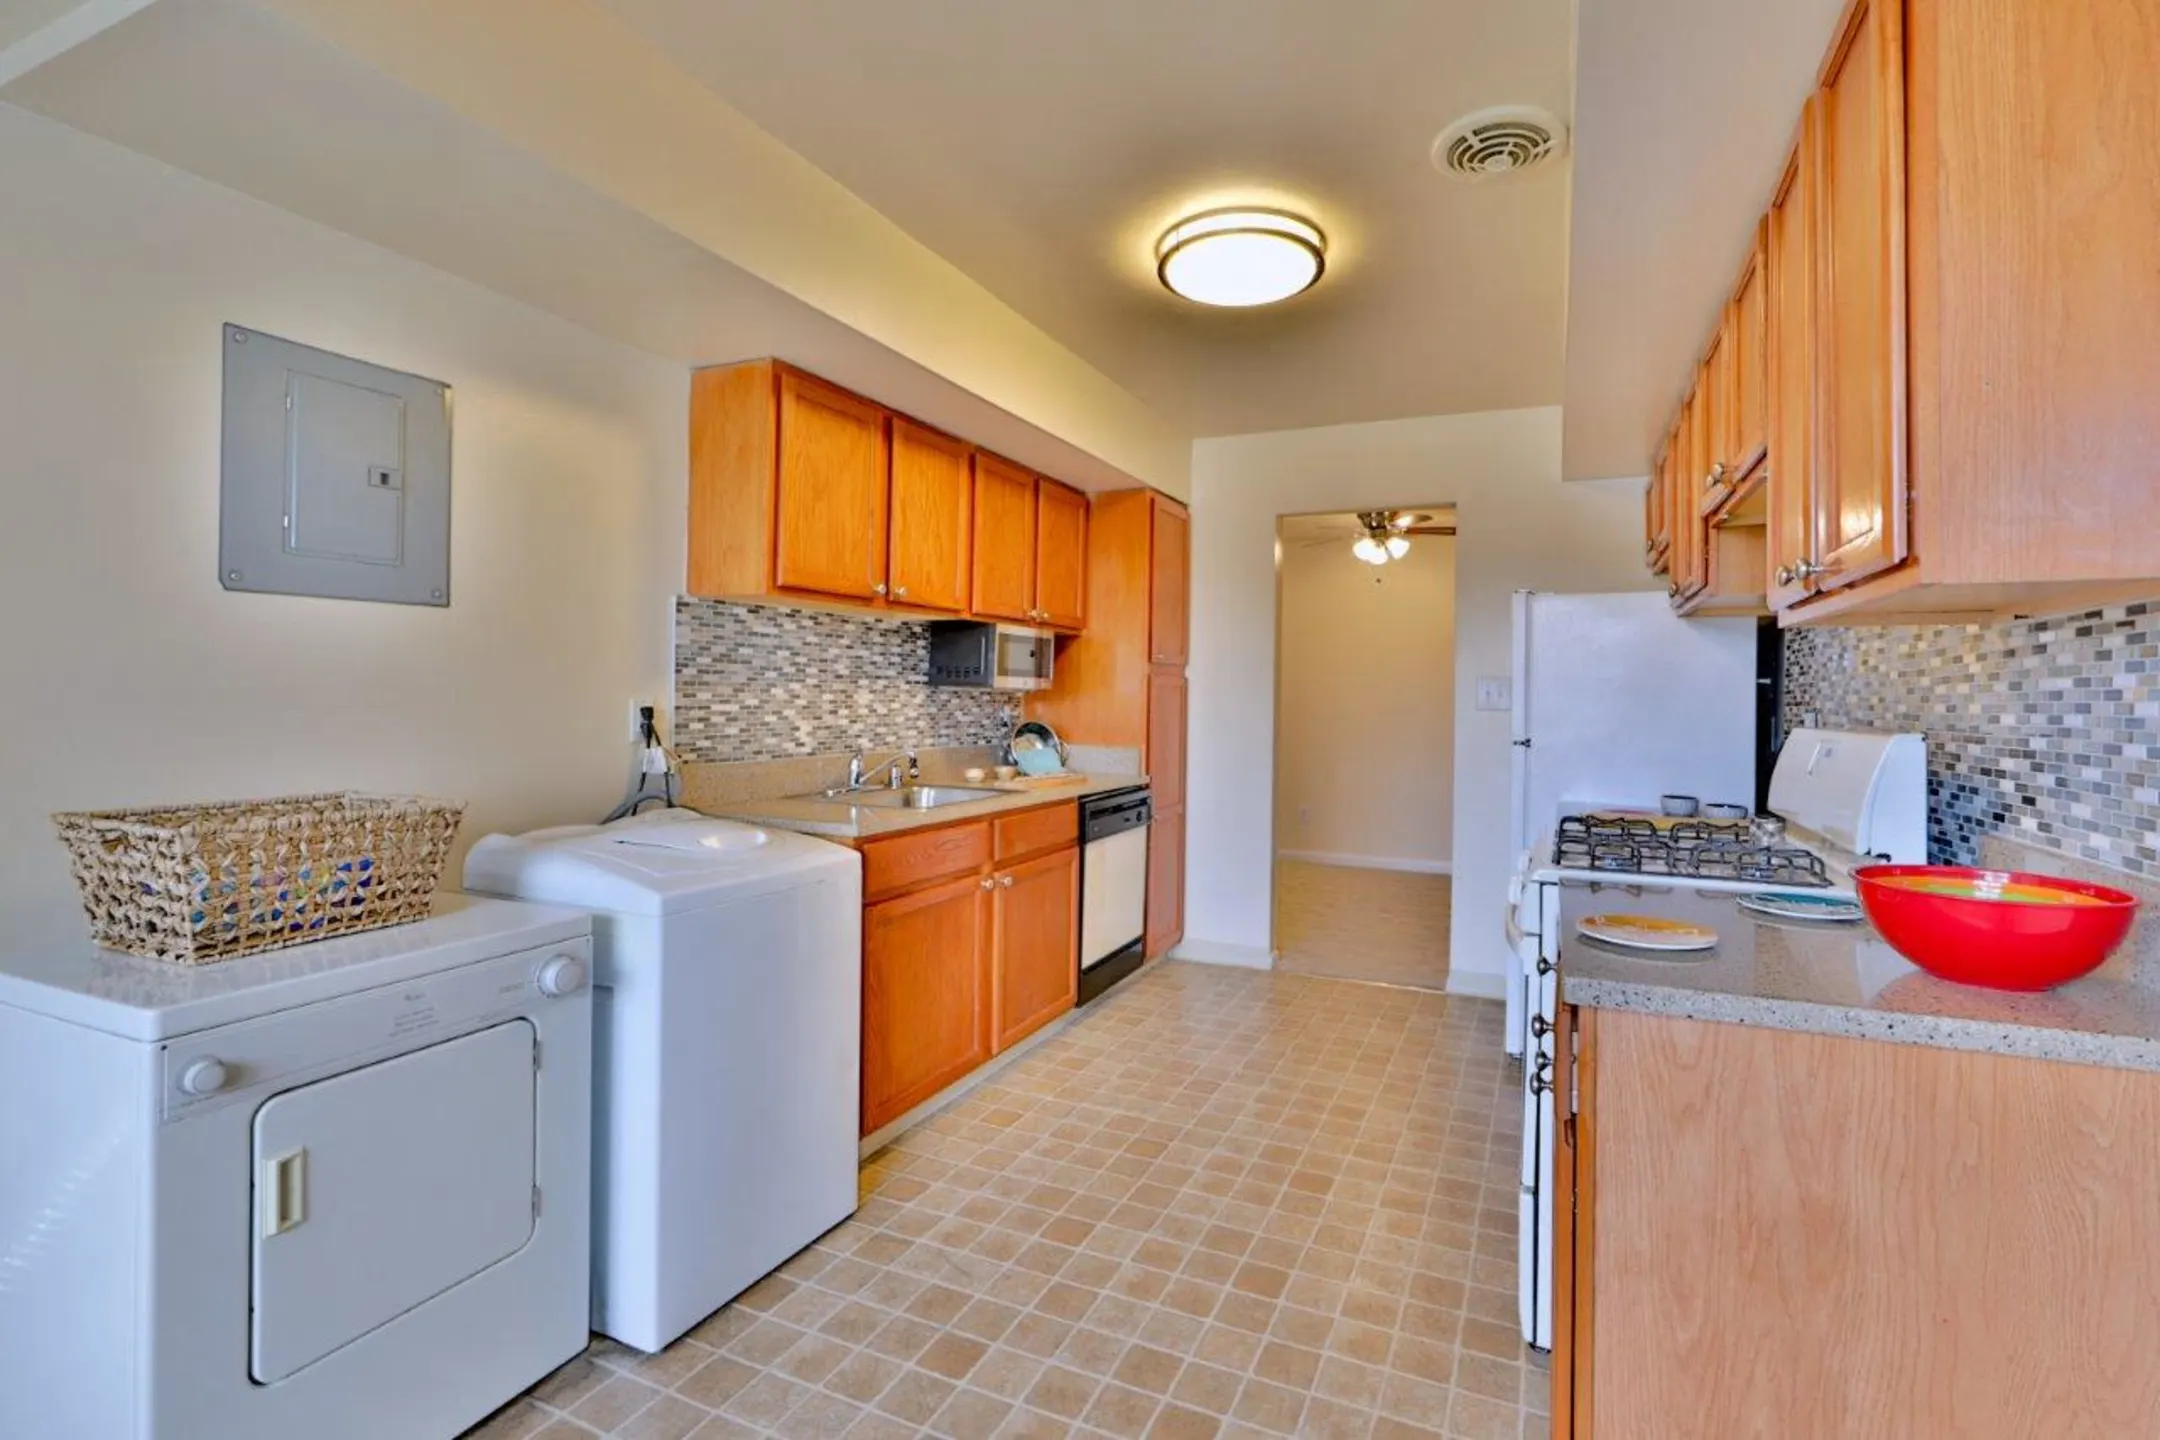 Kitchen - Westerlee Apartment Homes - Catonsville, MD